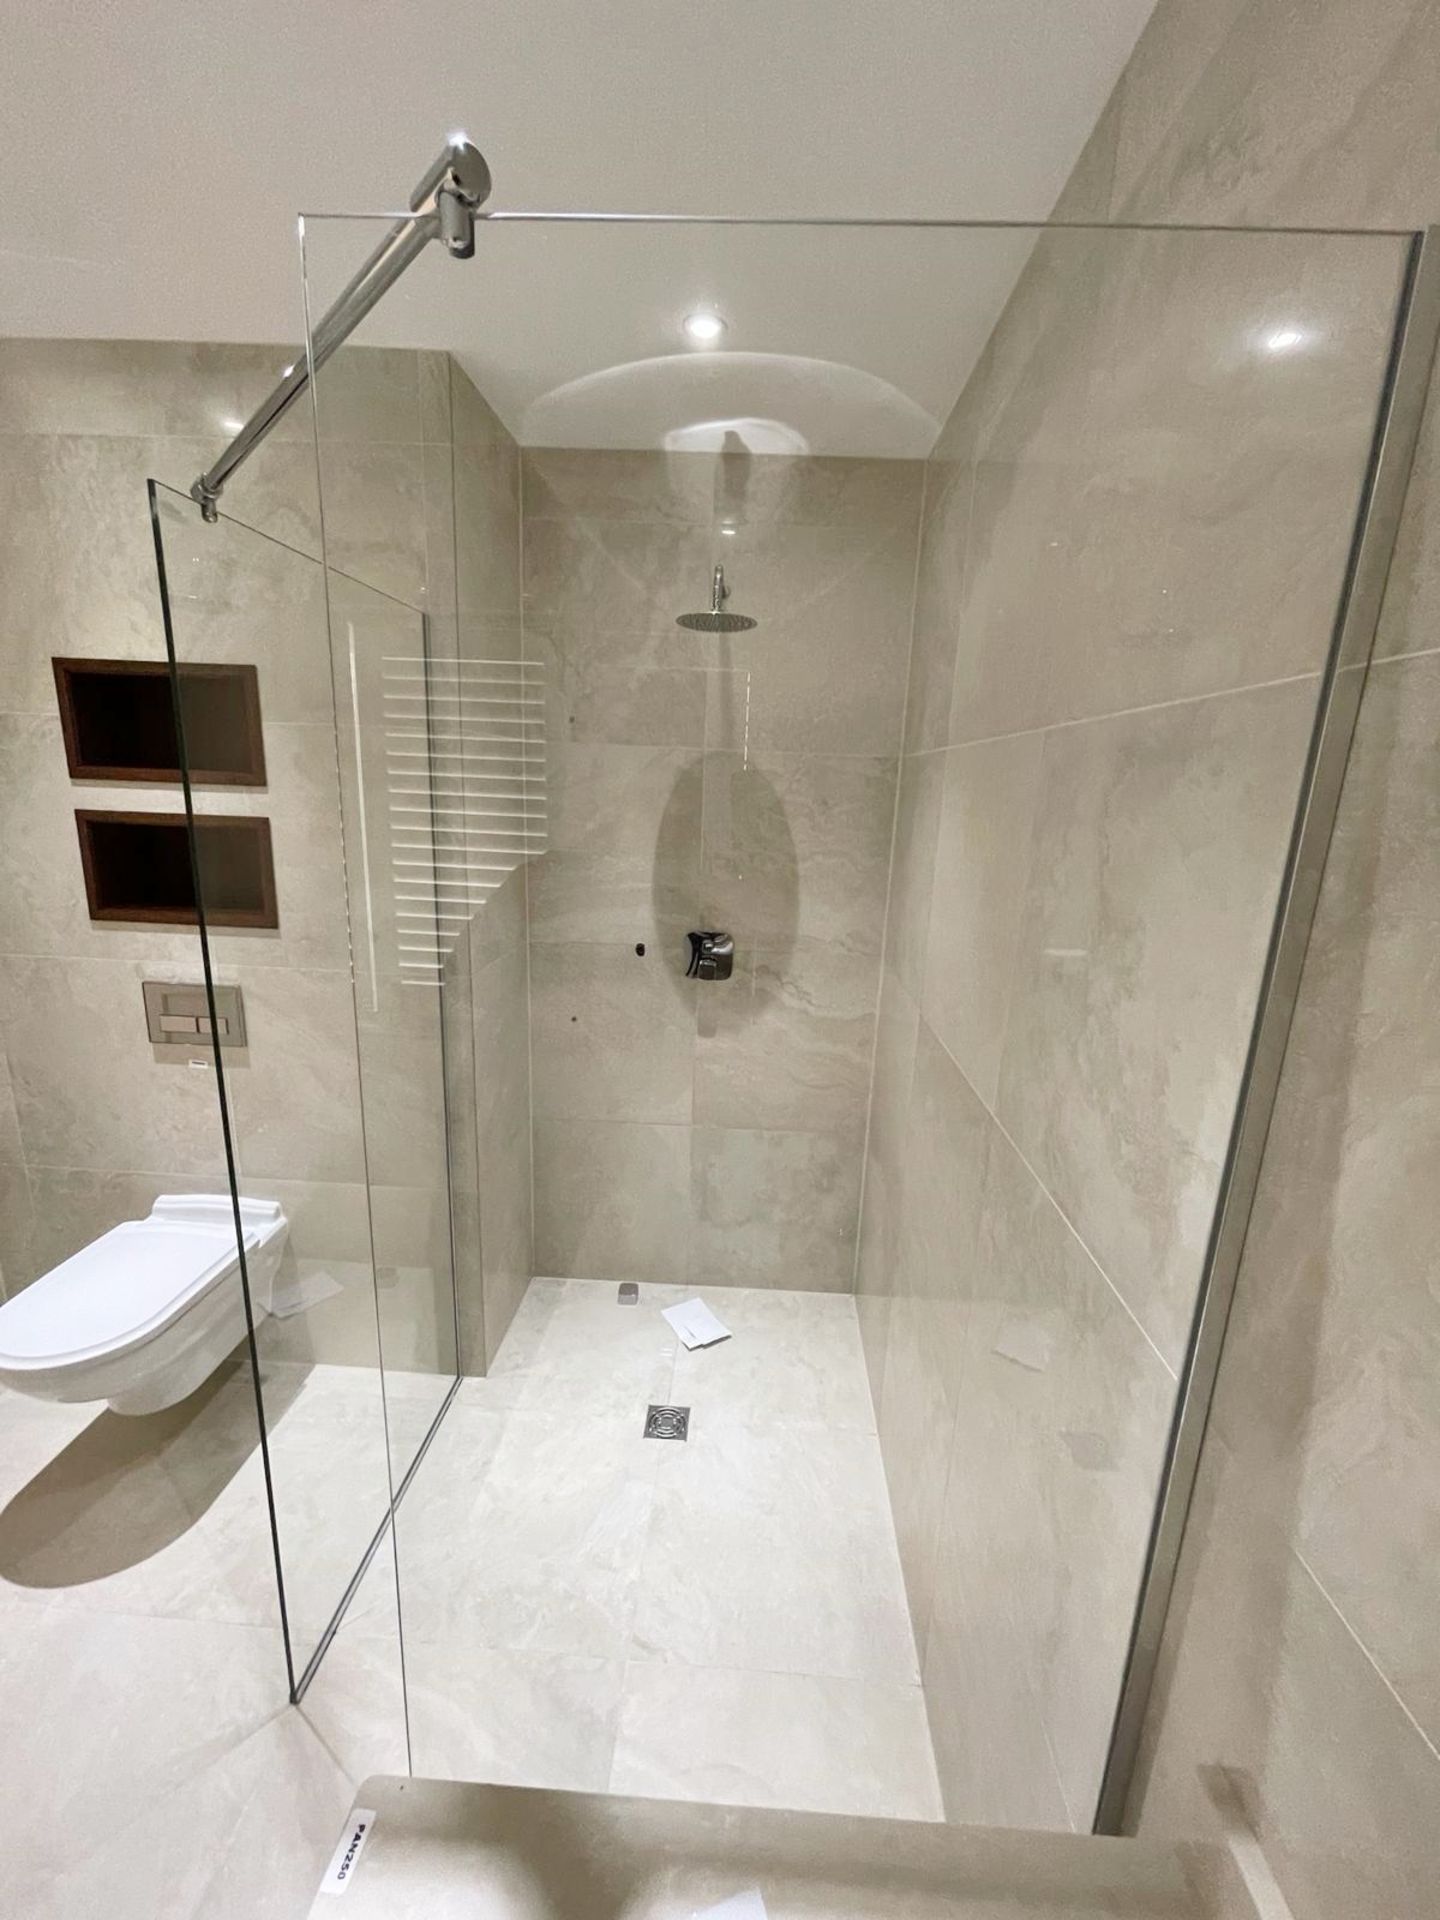 1 x Premium Shower and Enclosure + hansgrohe Controls and Thermostat - Ref: PAN251 / Bed2bth - CL896 - Image 13 of 15